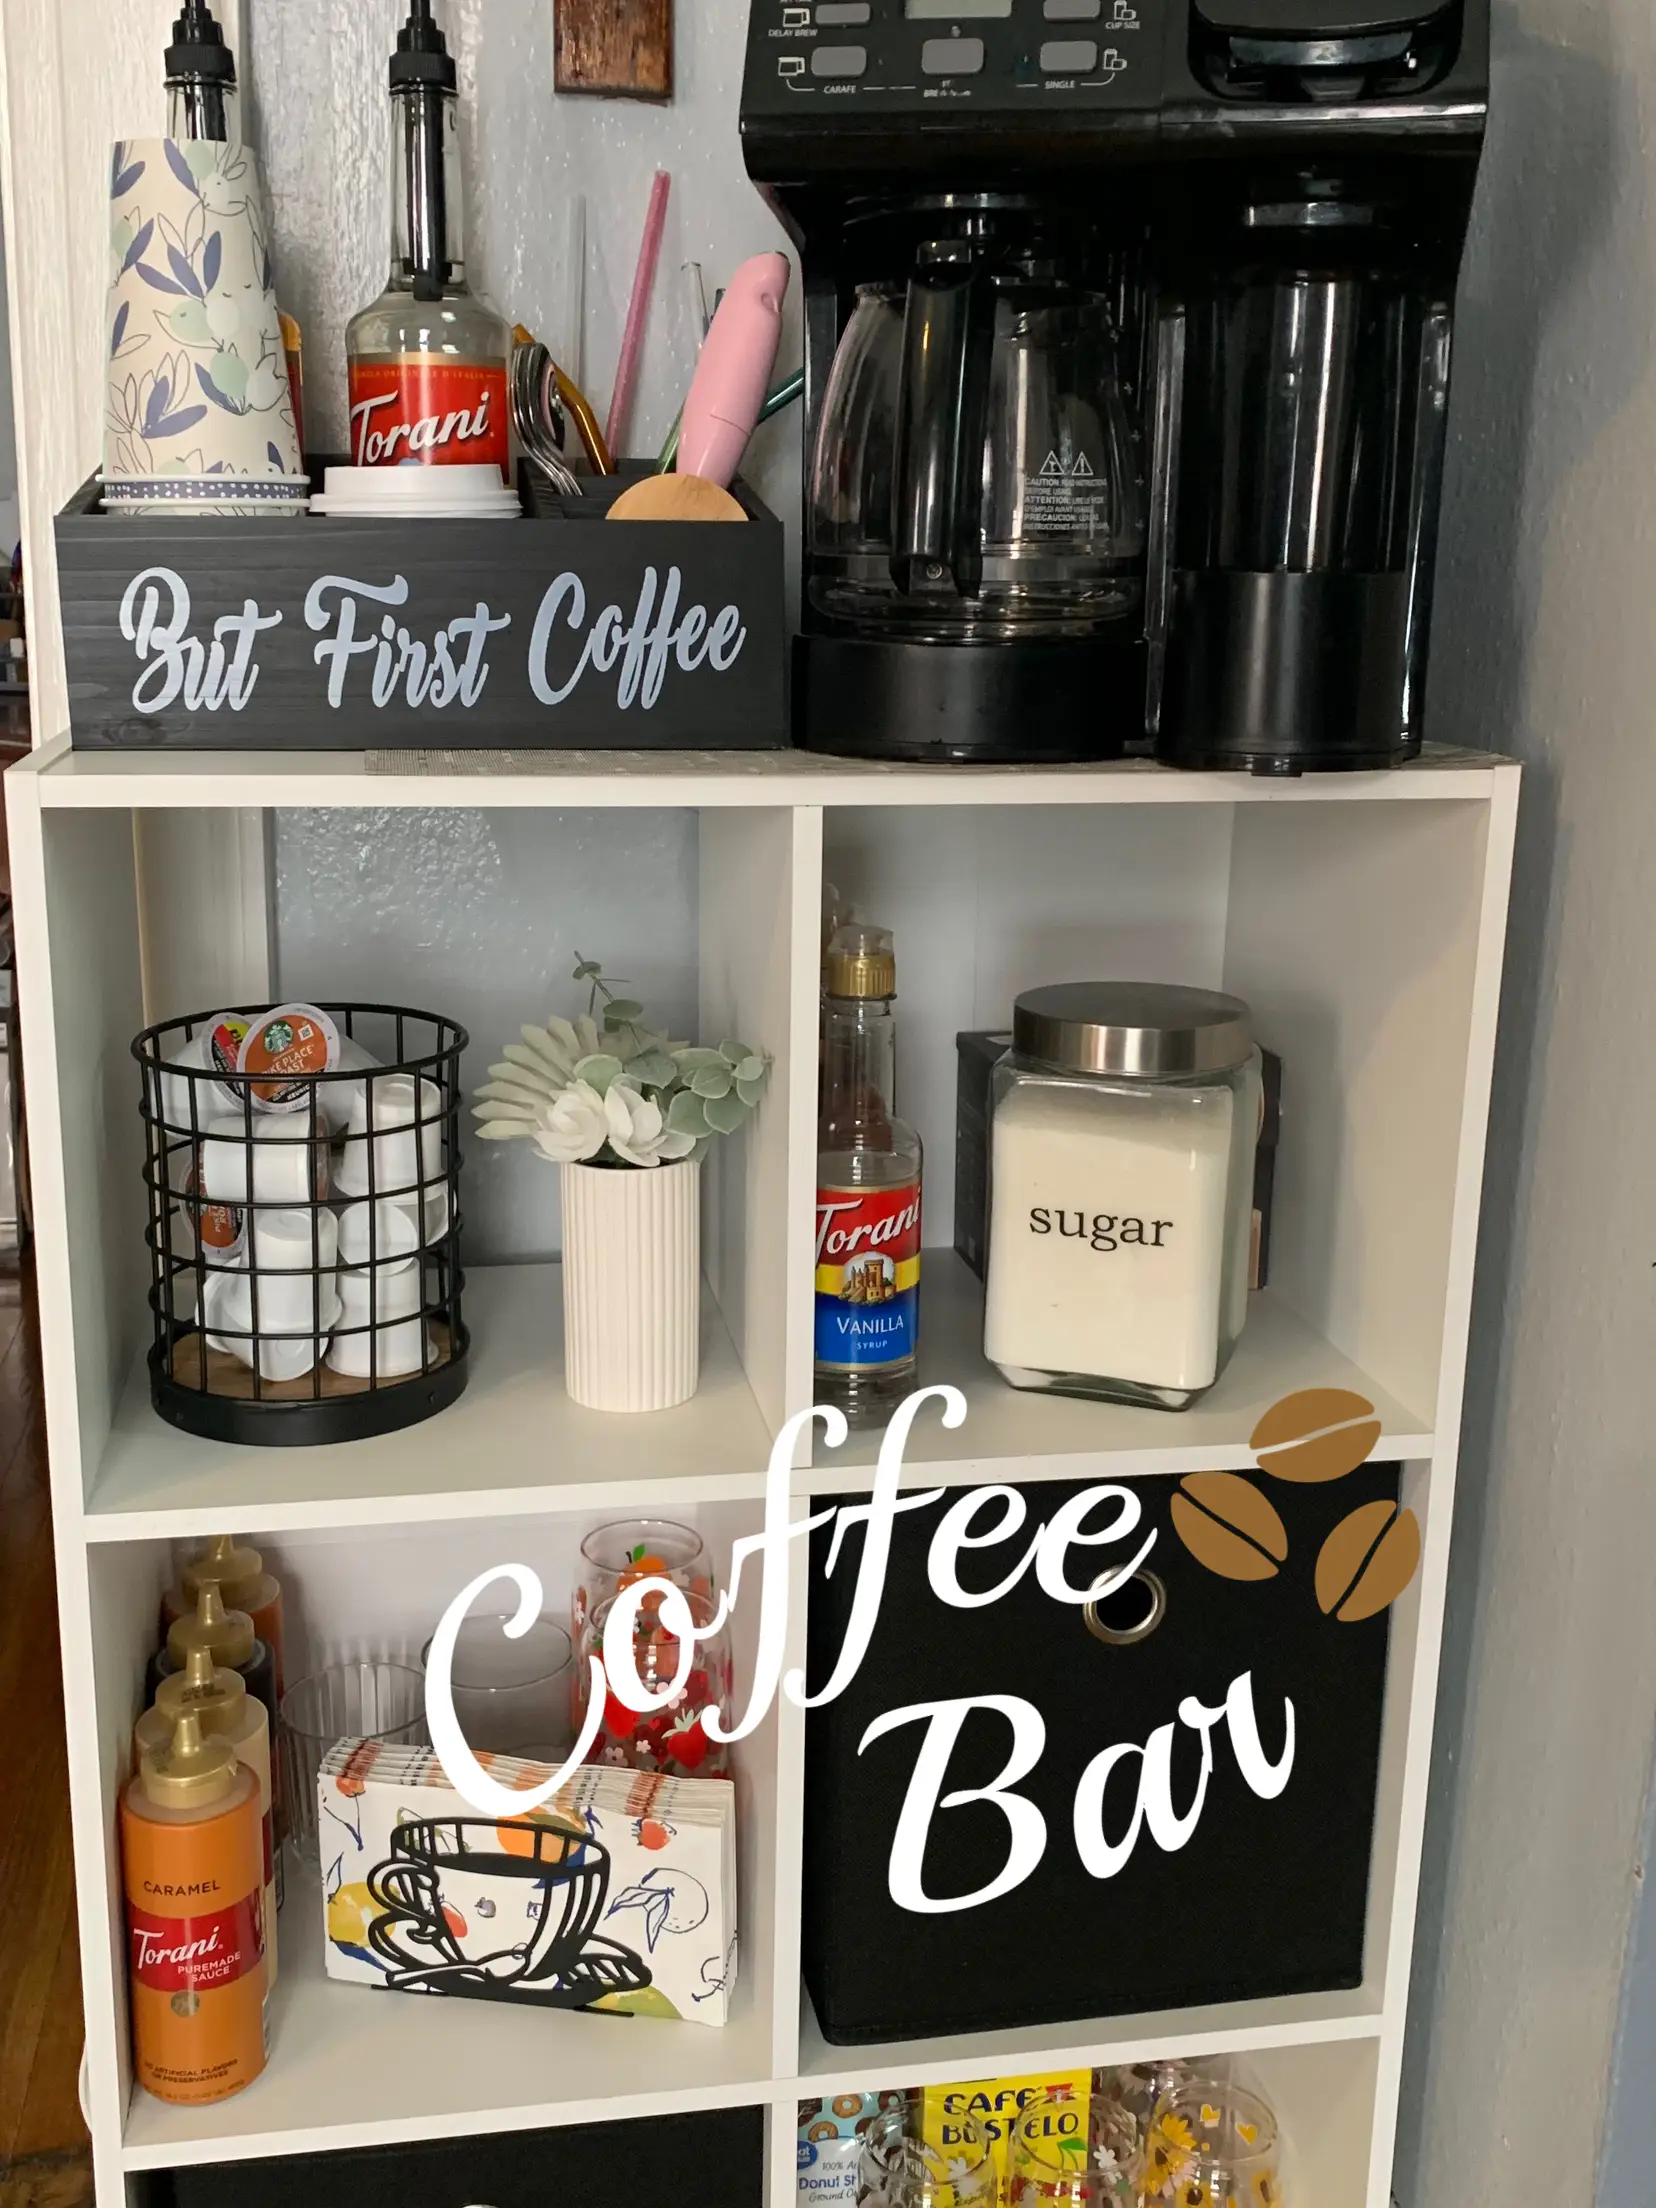 MY COFFEE BAR MUST HAVES, Gallery posted by morganalanna